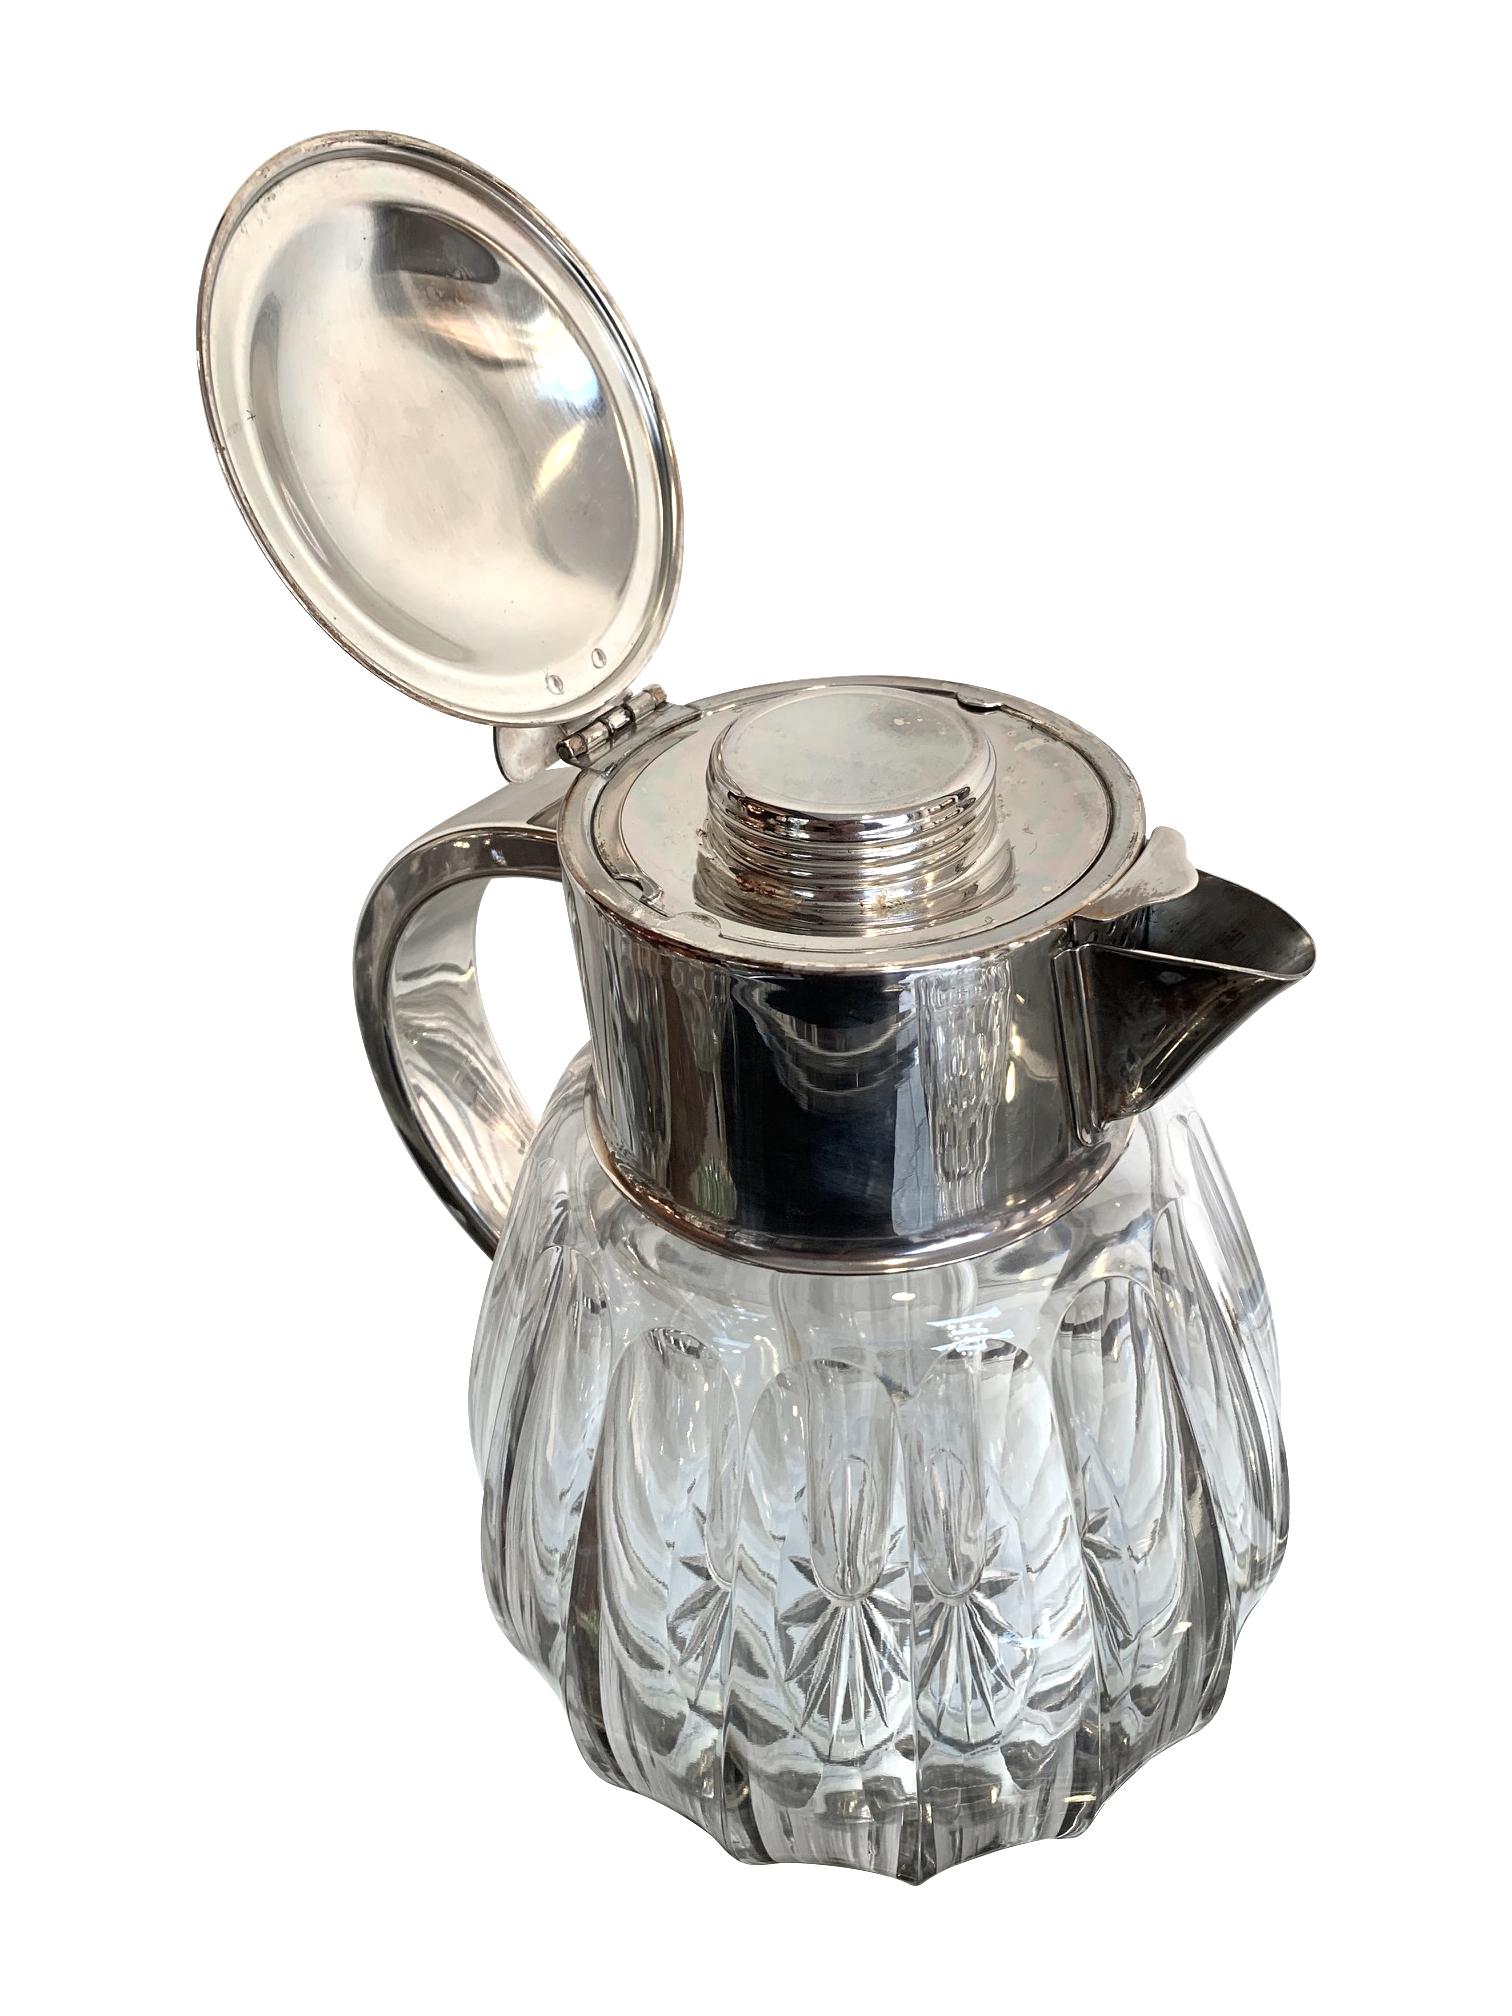 An English silver plated faceted crystal lemonade / cocktail jug with hinged silver plated lid and handle that opens to reveal the central glass ice compartment. The pourer has a removable strainer.